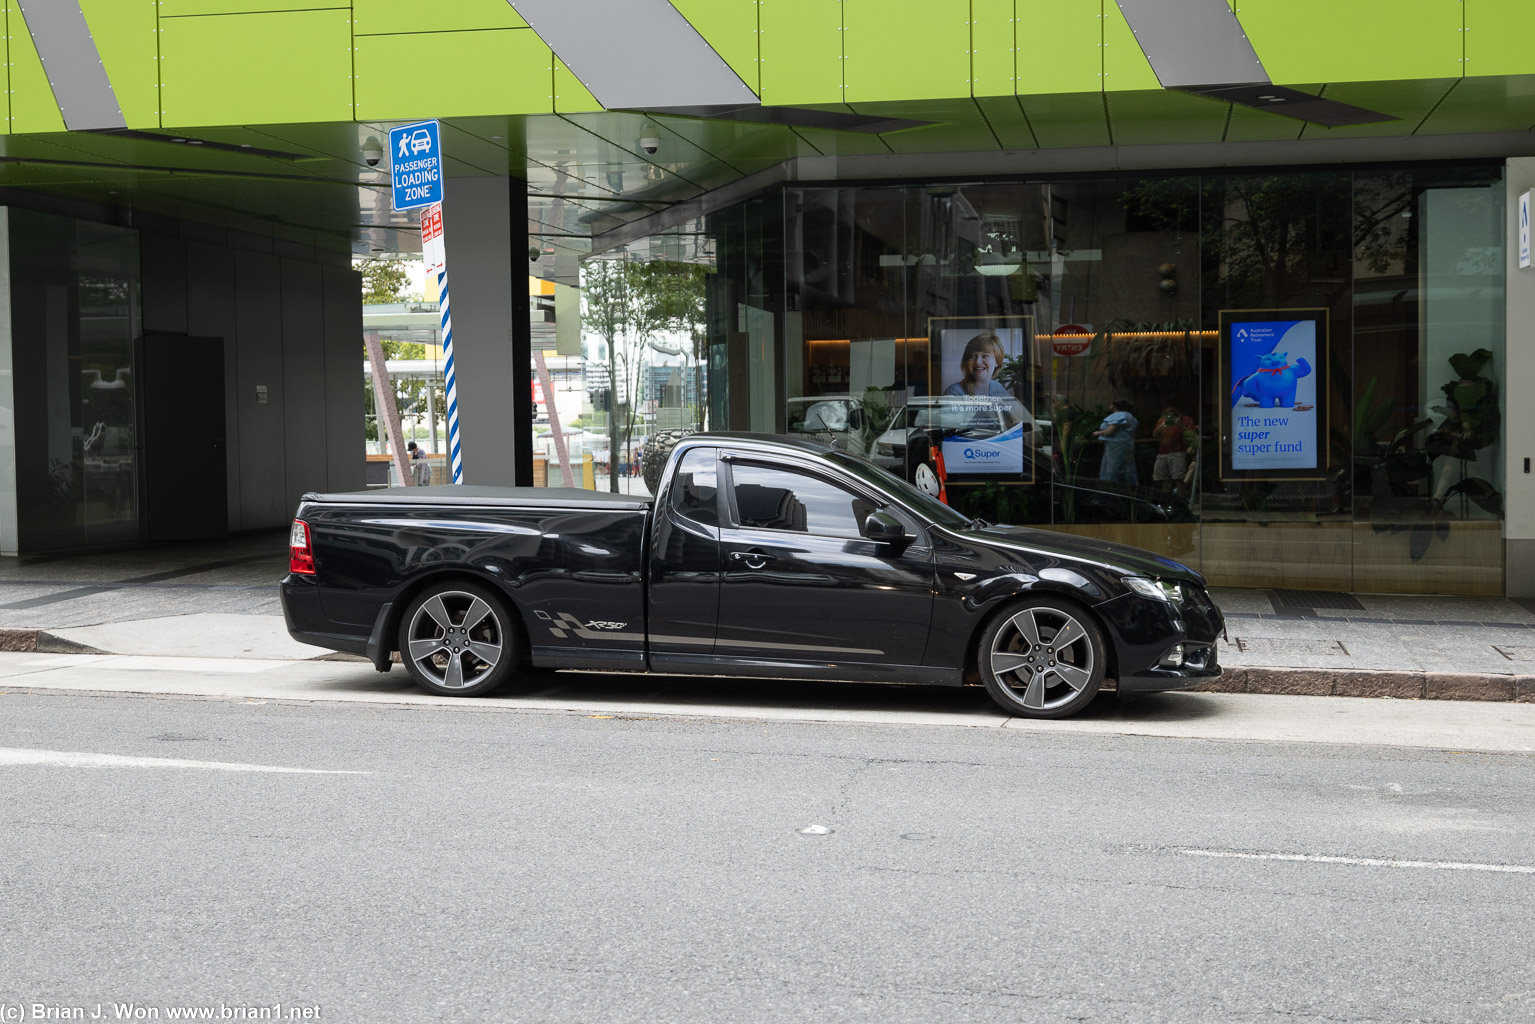 Holden Ute, a reminder we're not in America.